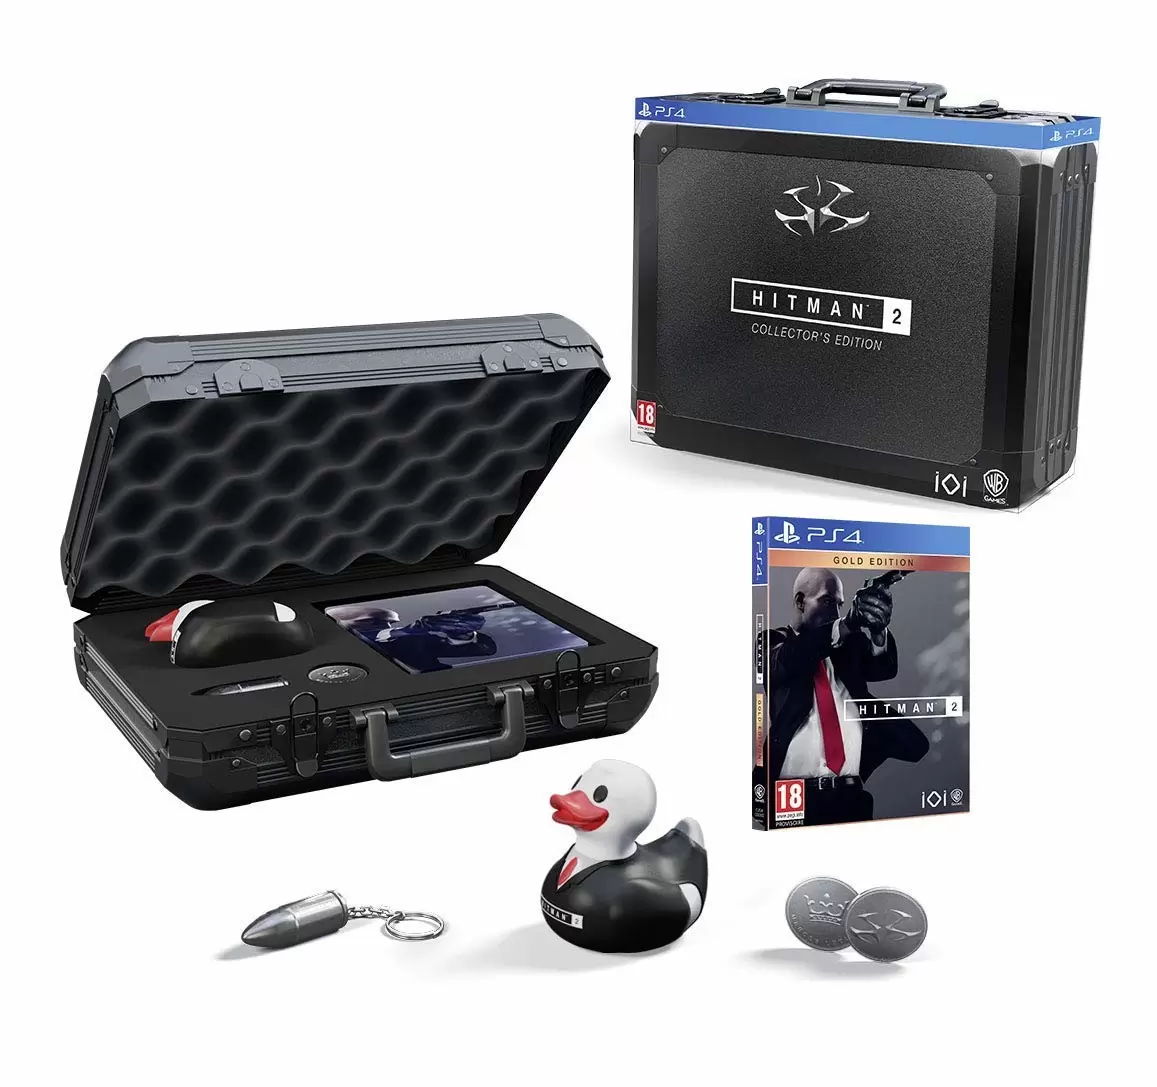 PS4 Games - Hitman 2 - Collector\'s Edition